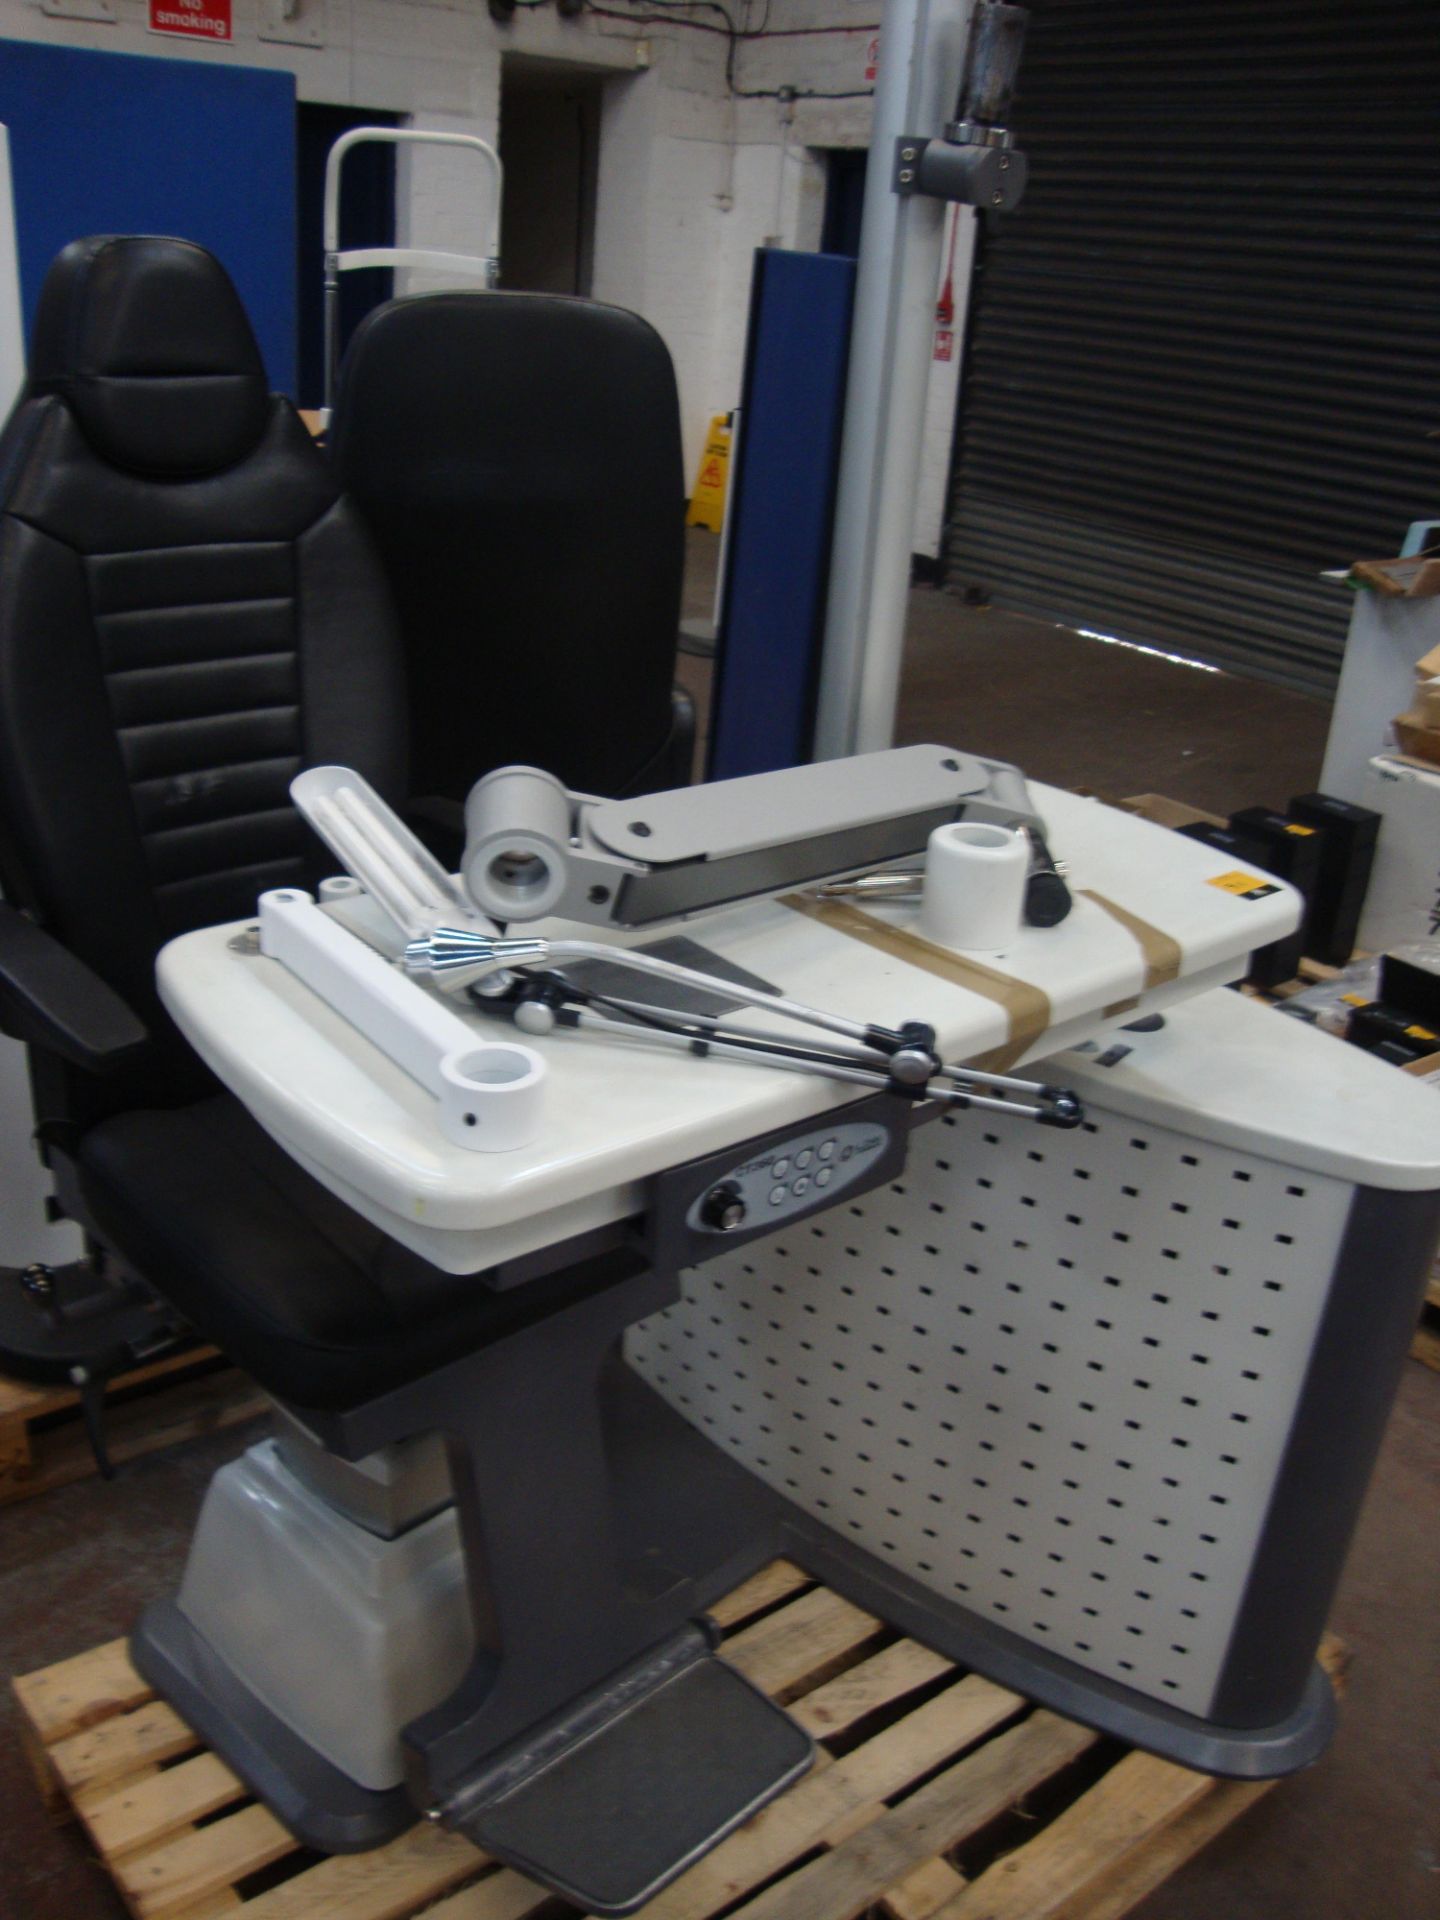 Combi unit testing chair & table. Please note that this sale consists of a large number of testing